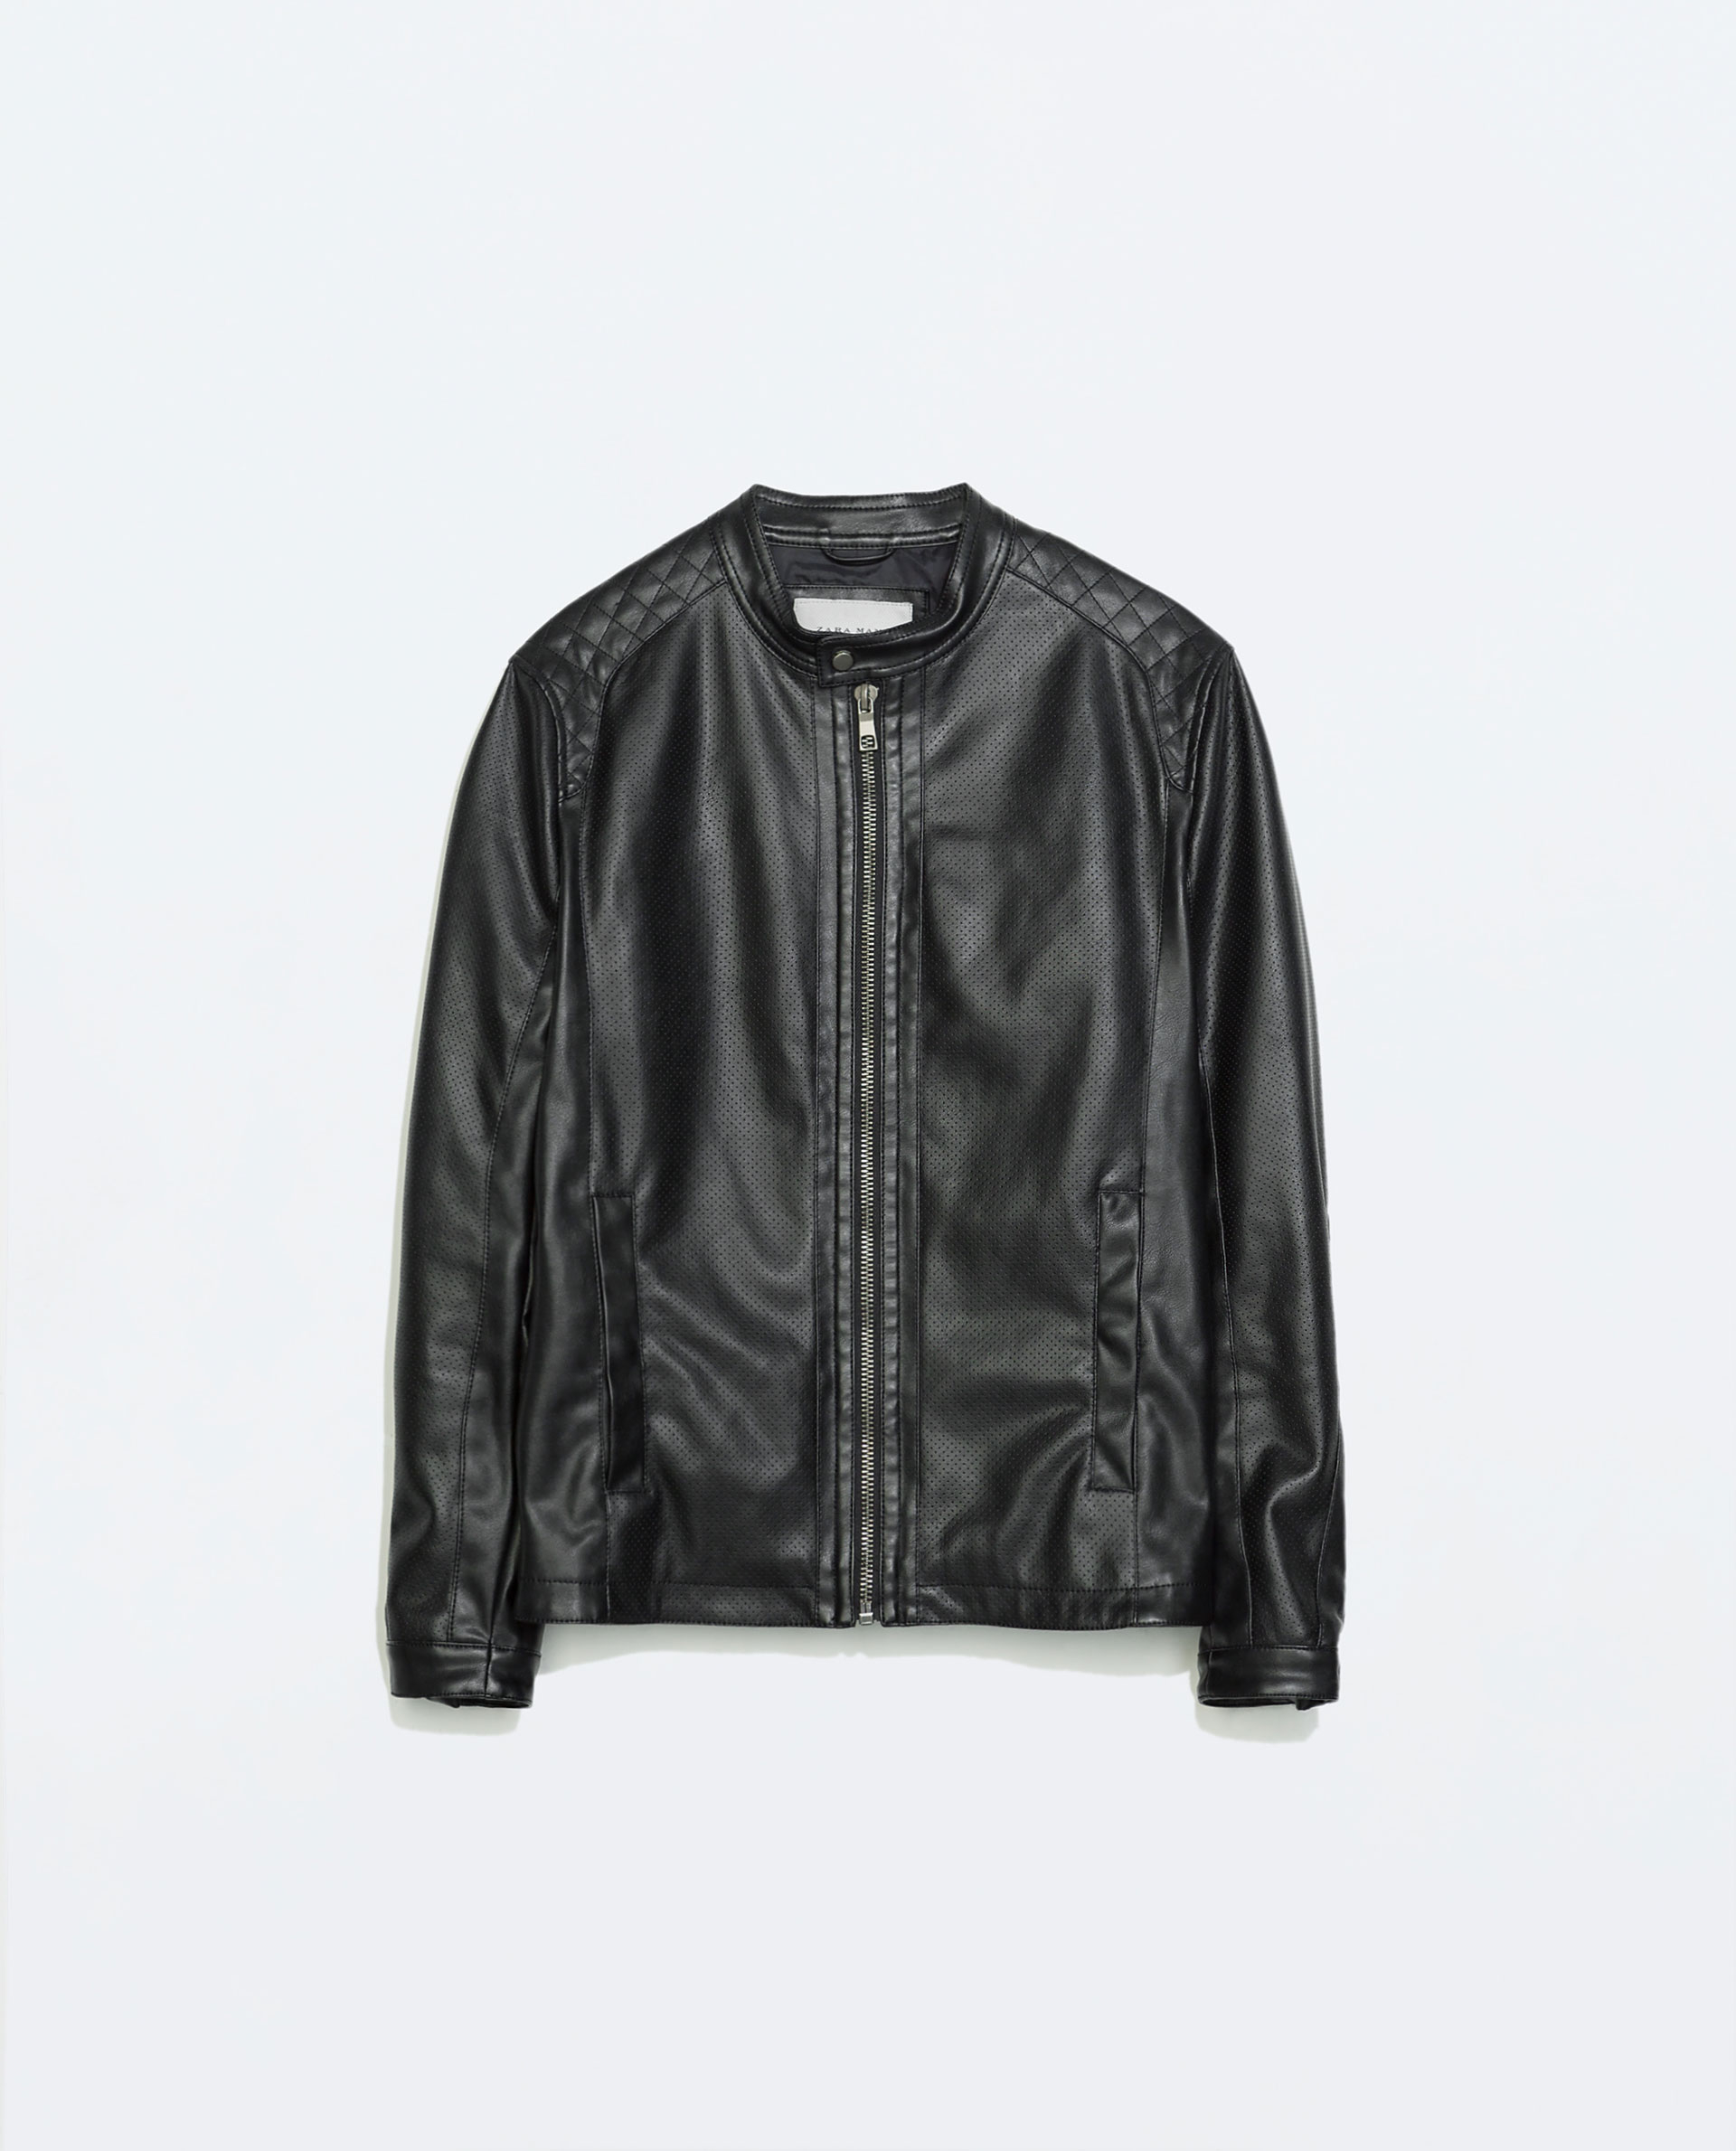 Zara Perforated Faux Leather Jacket in Black for Men | Lyst